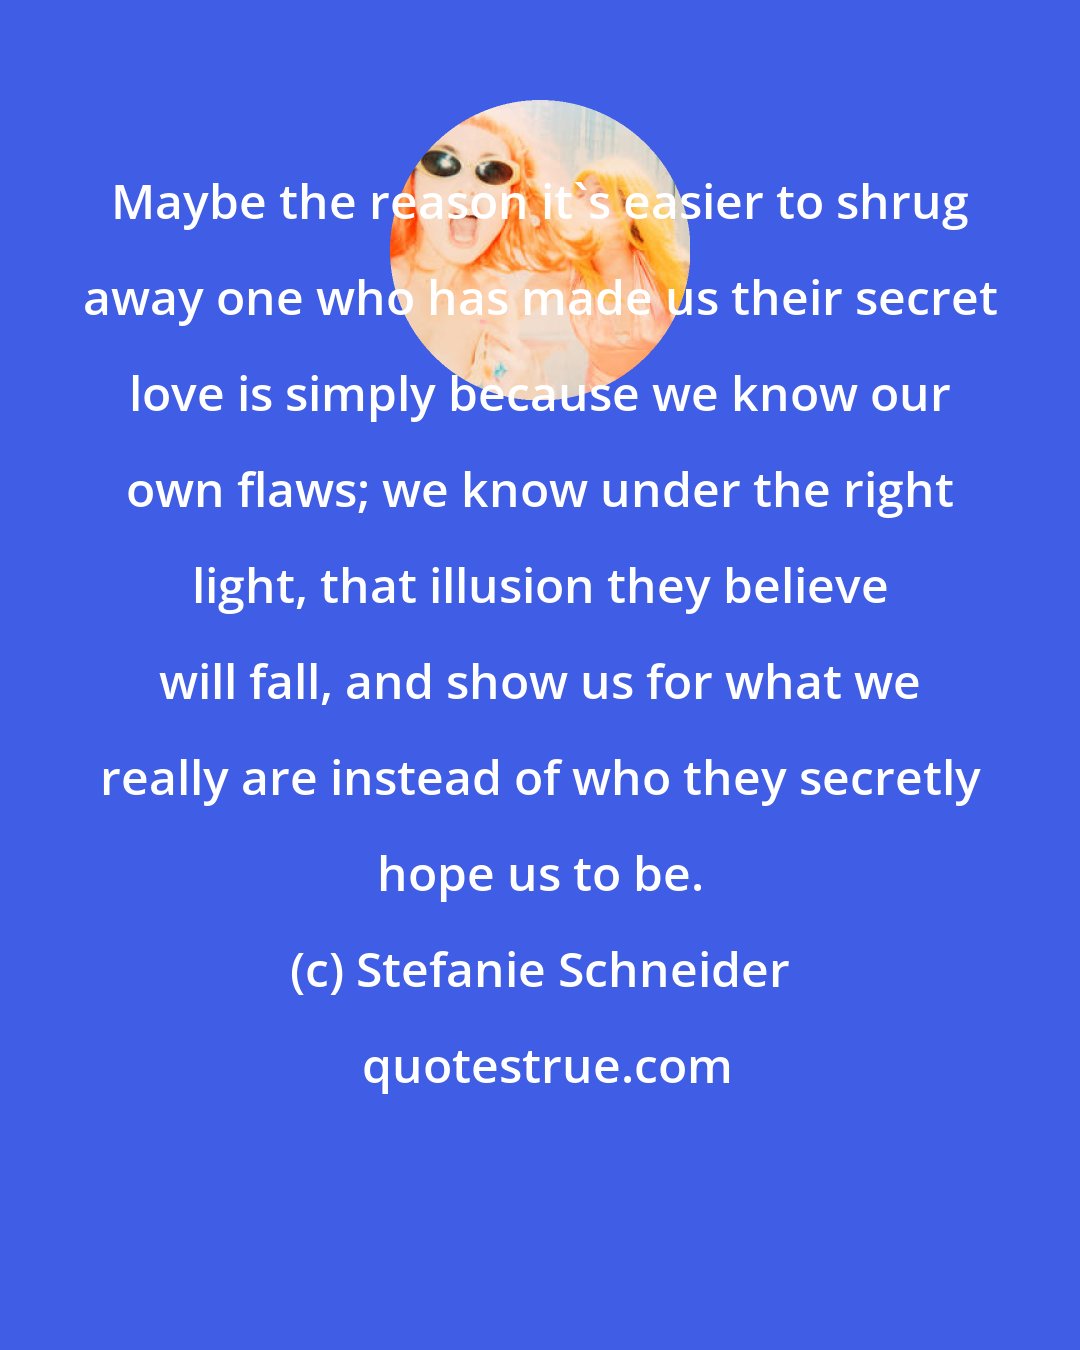 Stefanie Schneider: Maybe the reason it's easier to shrug away one who has made us their secret love is simply because we know our own flaws; we know under the right light, that illusion they believe will fall, and show us for what we really are instead of who they secretly hope us to be.